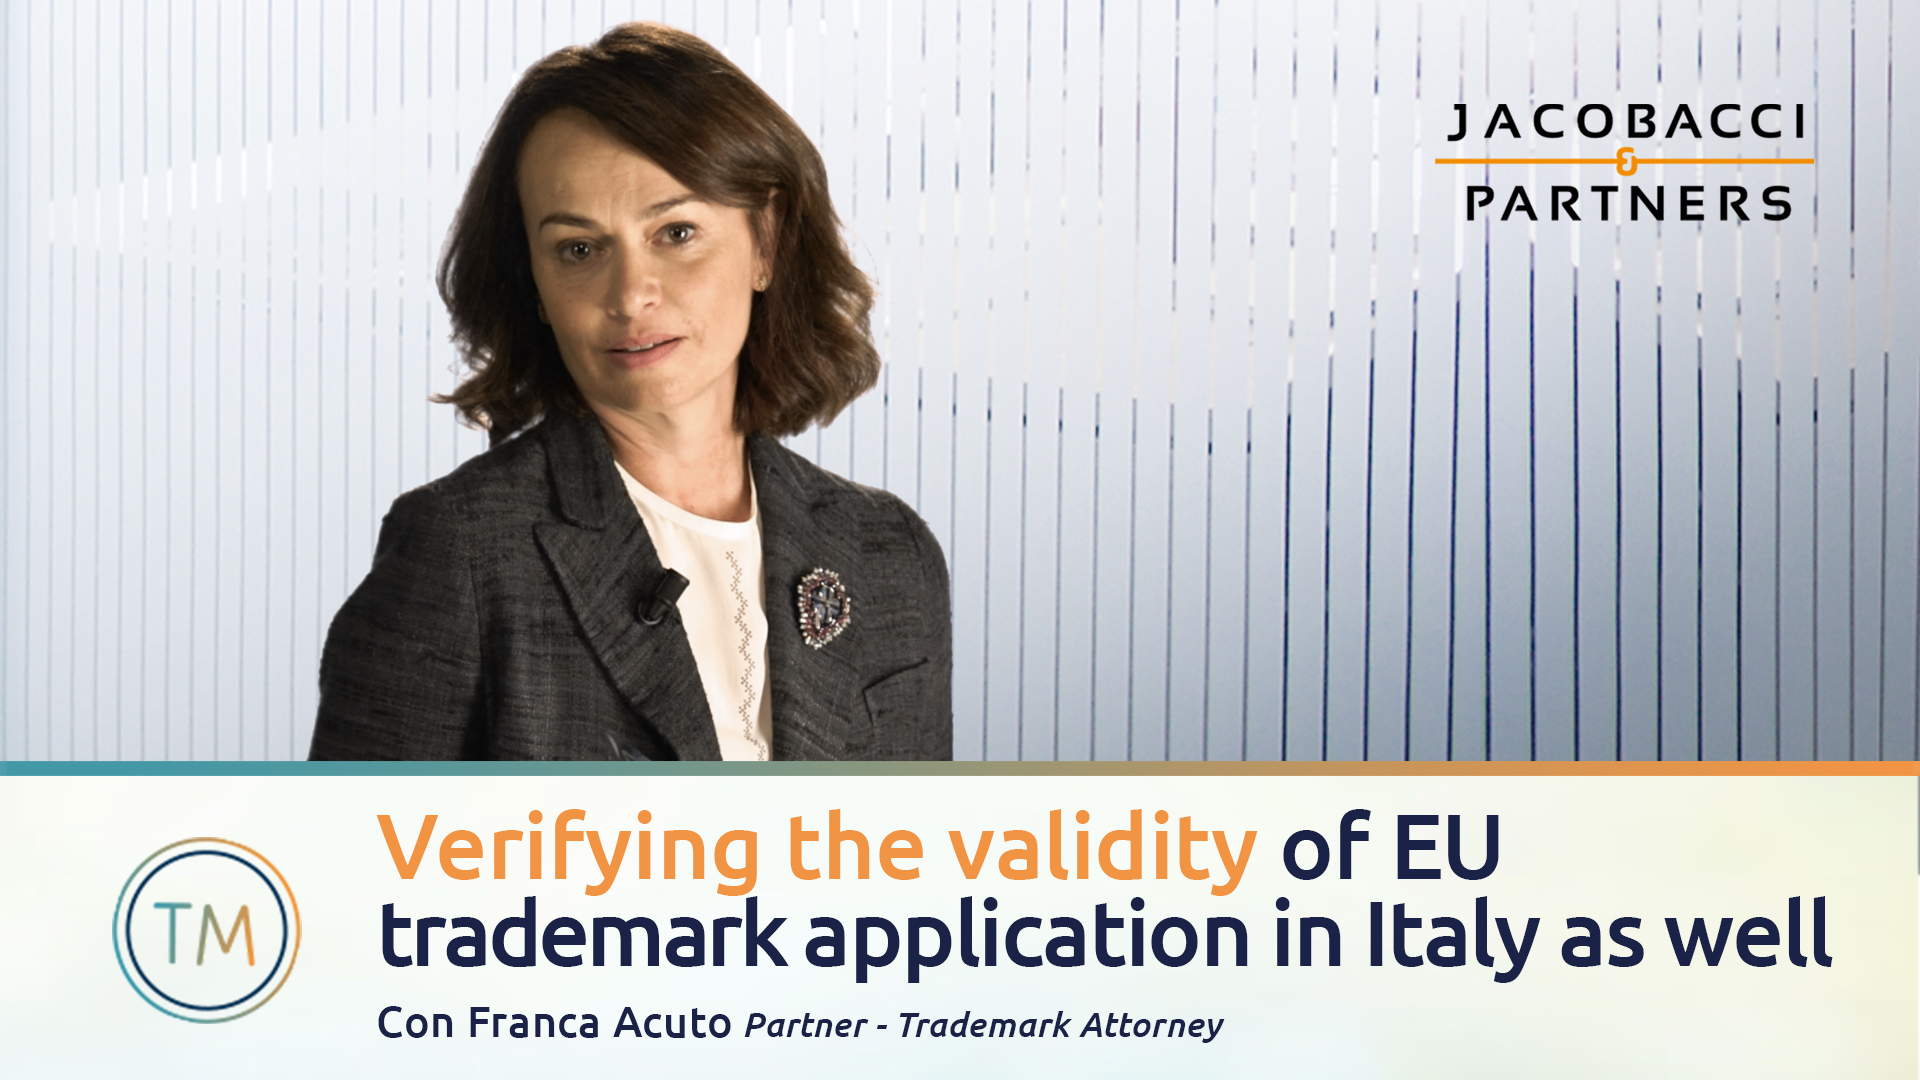 The importance of verifying the validity of a european trademark application in Italy as well